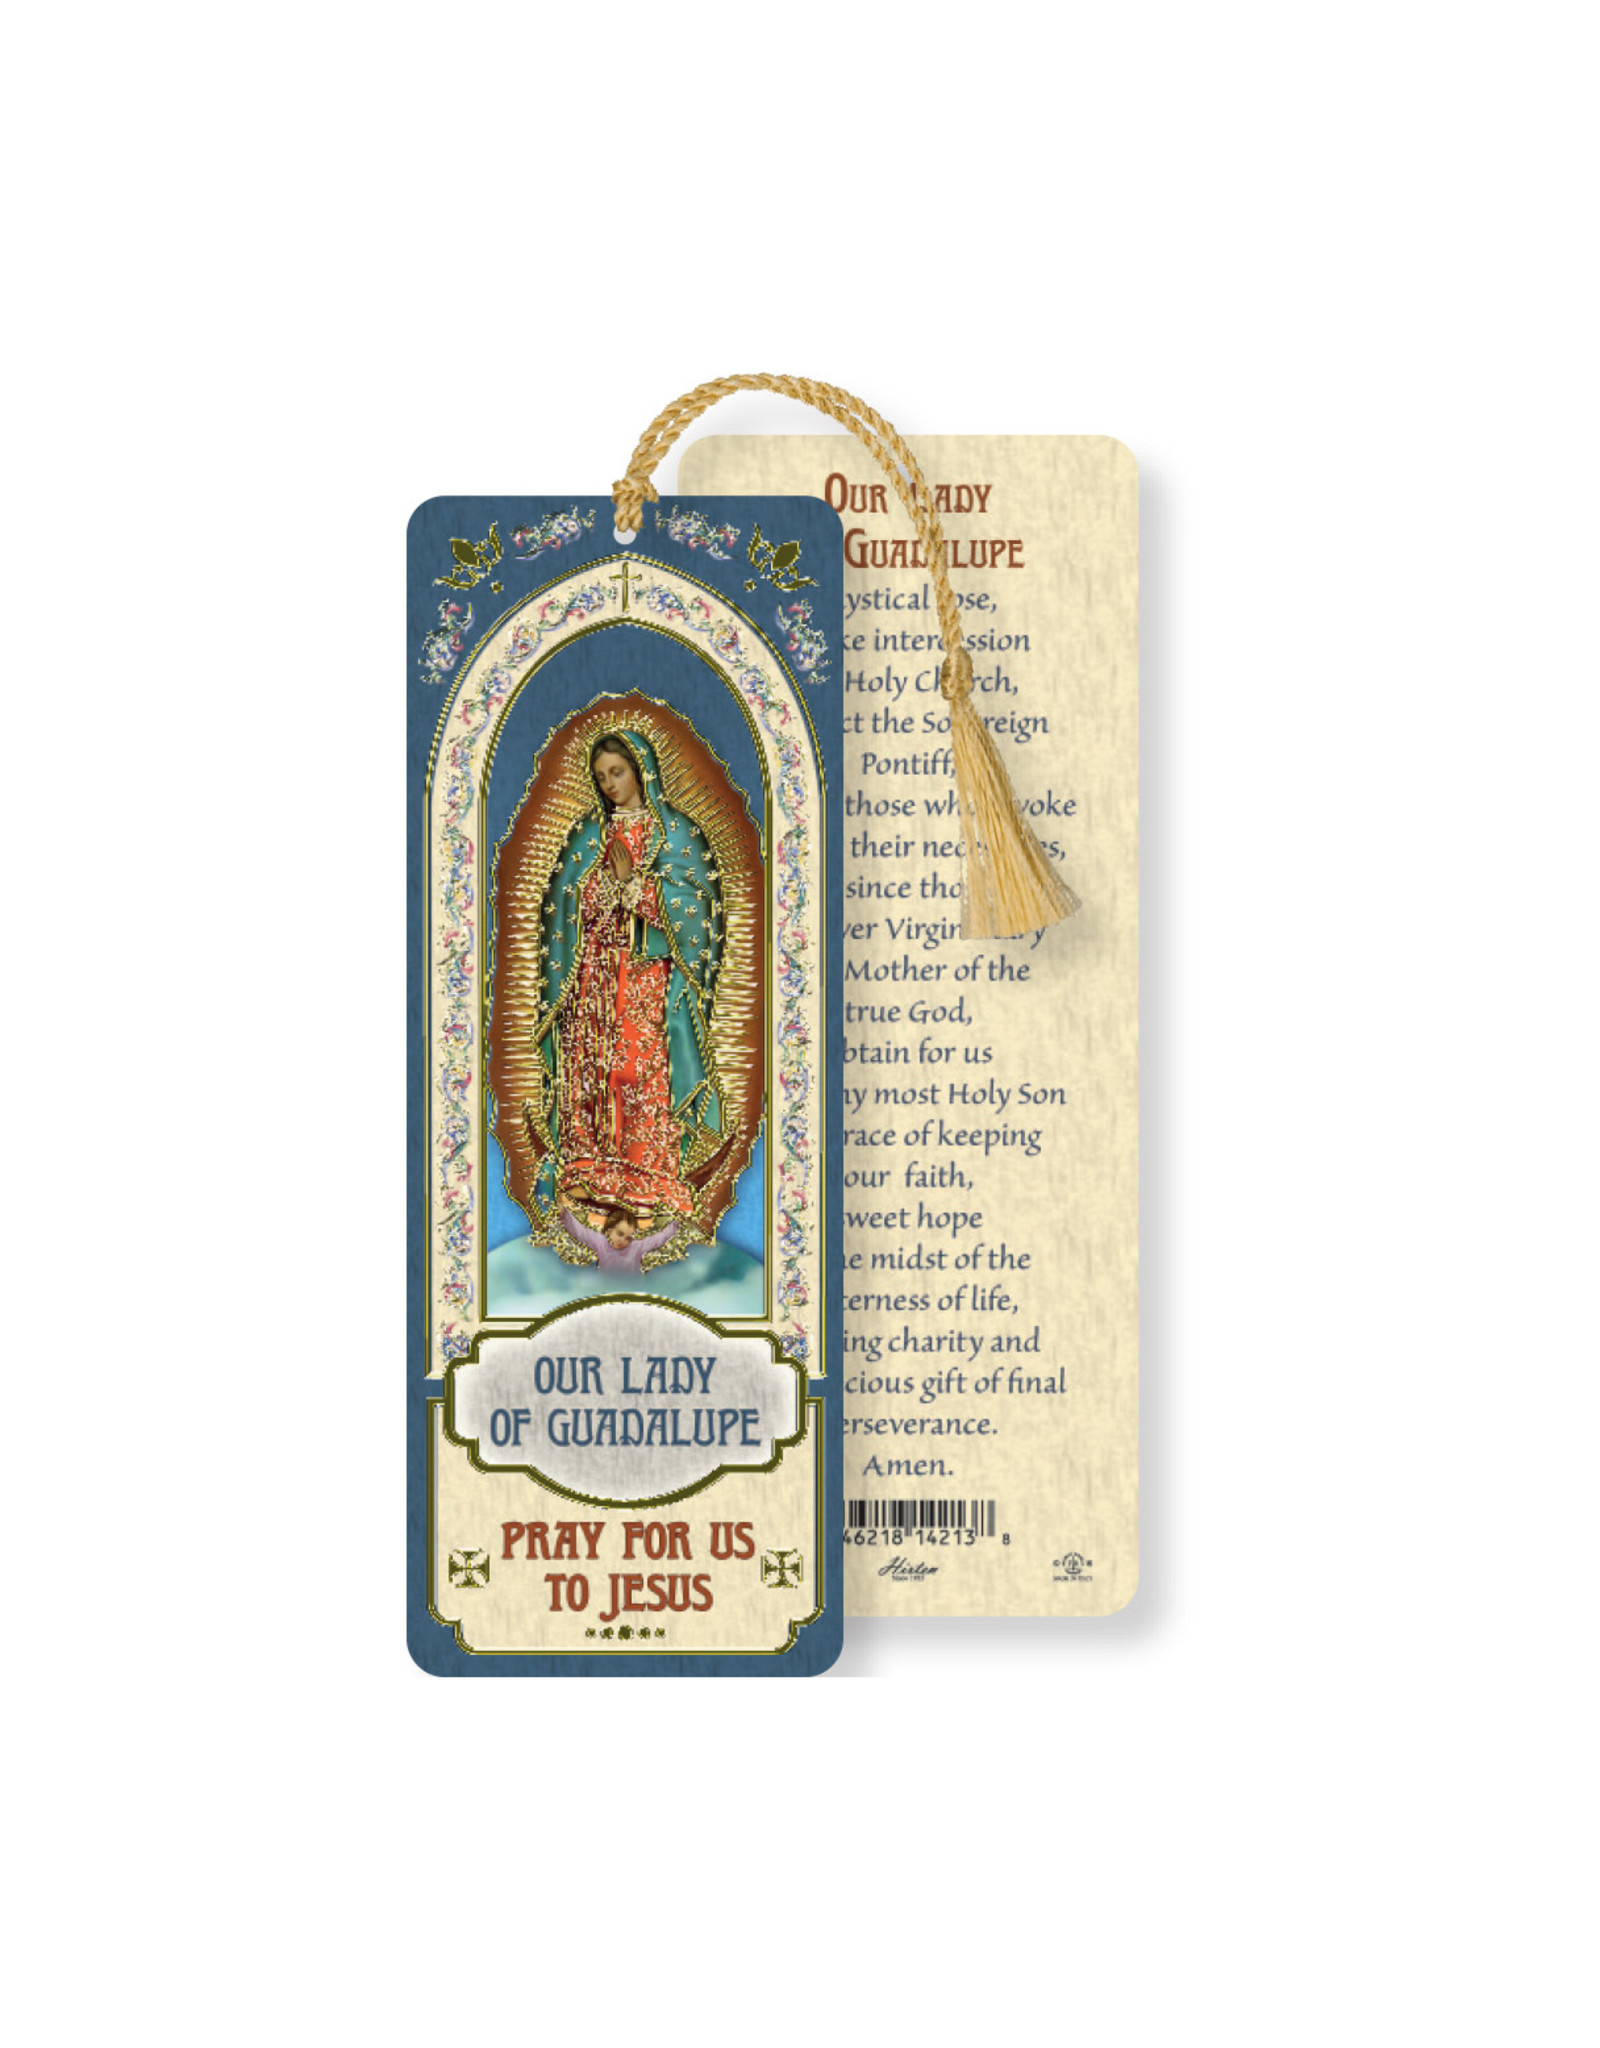 Hirten Laminated Gold Foil Bookmark - Our Lady of Guadalupe